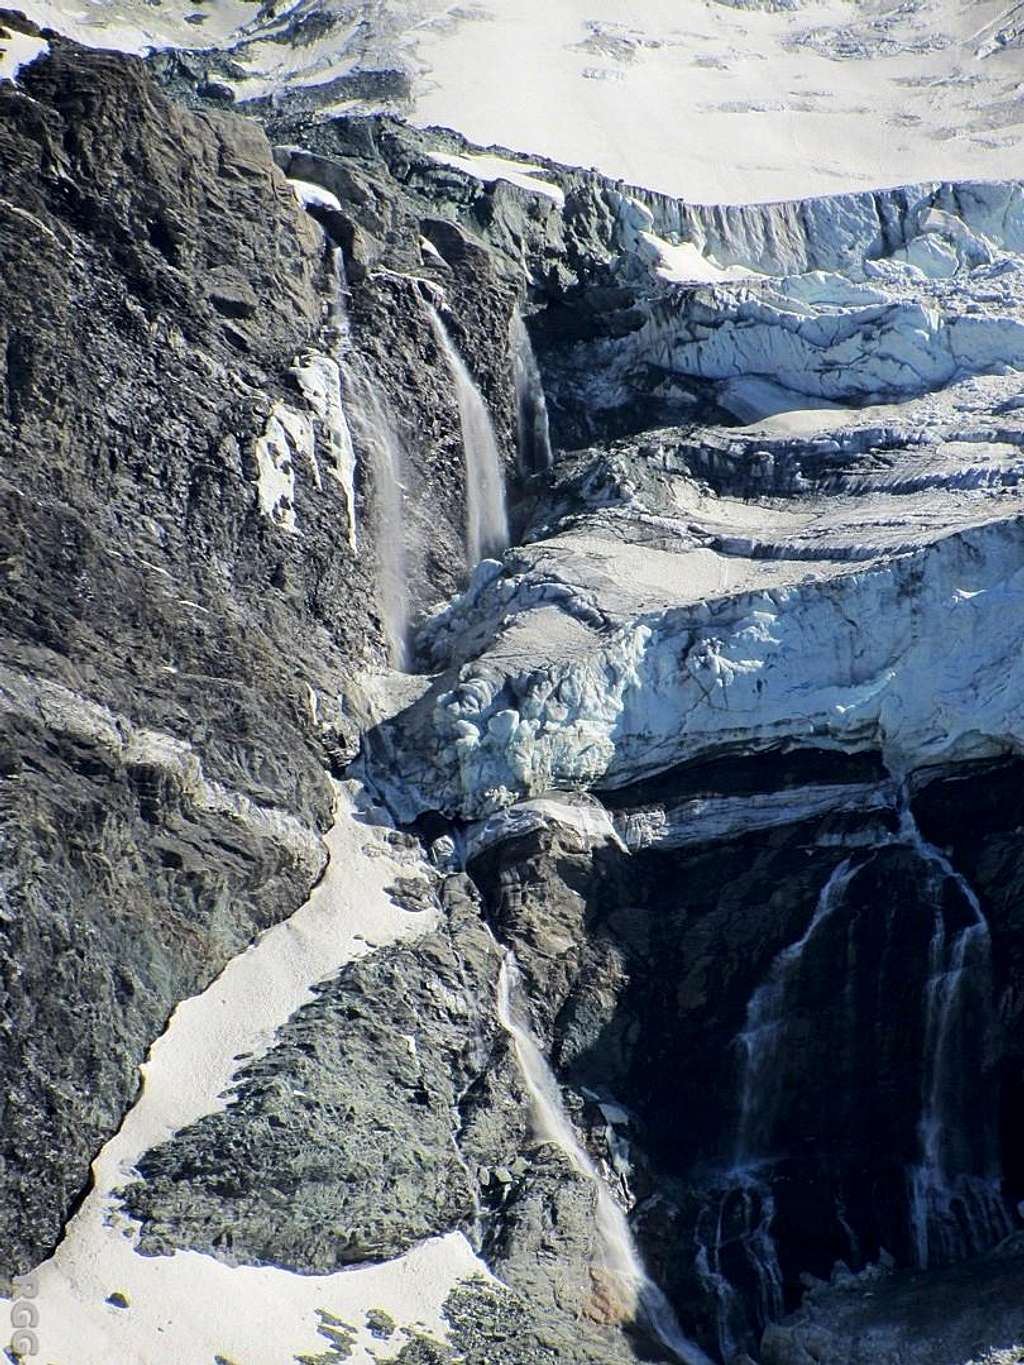 A small avalanche on the edge of the Turtmanngletscher